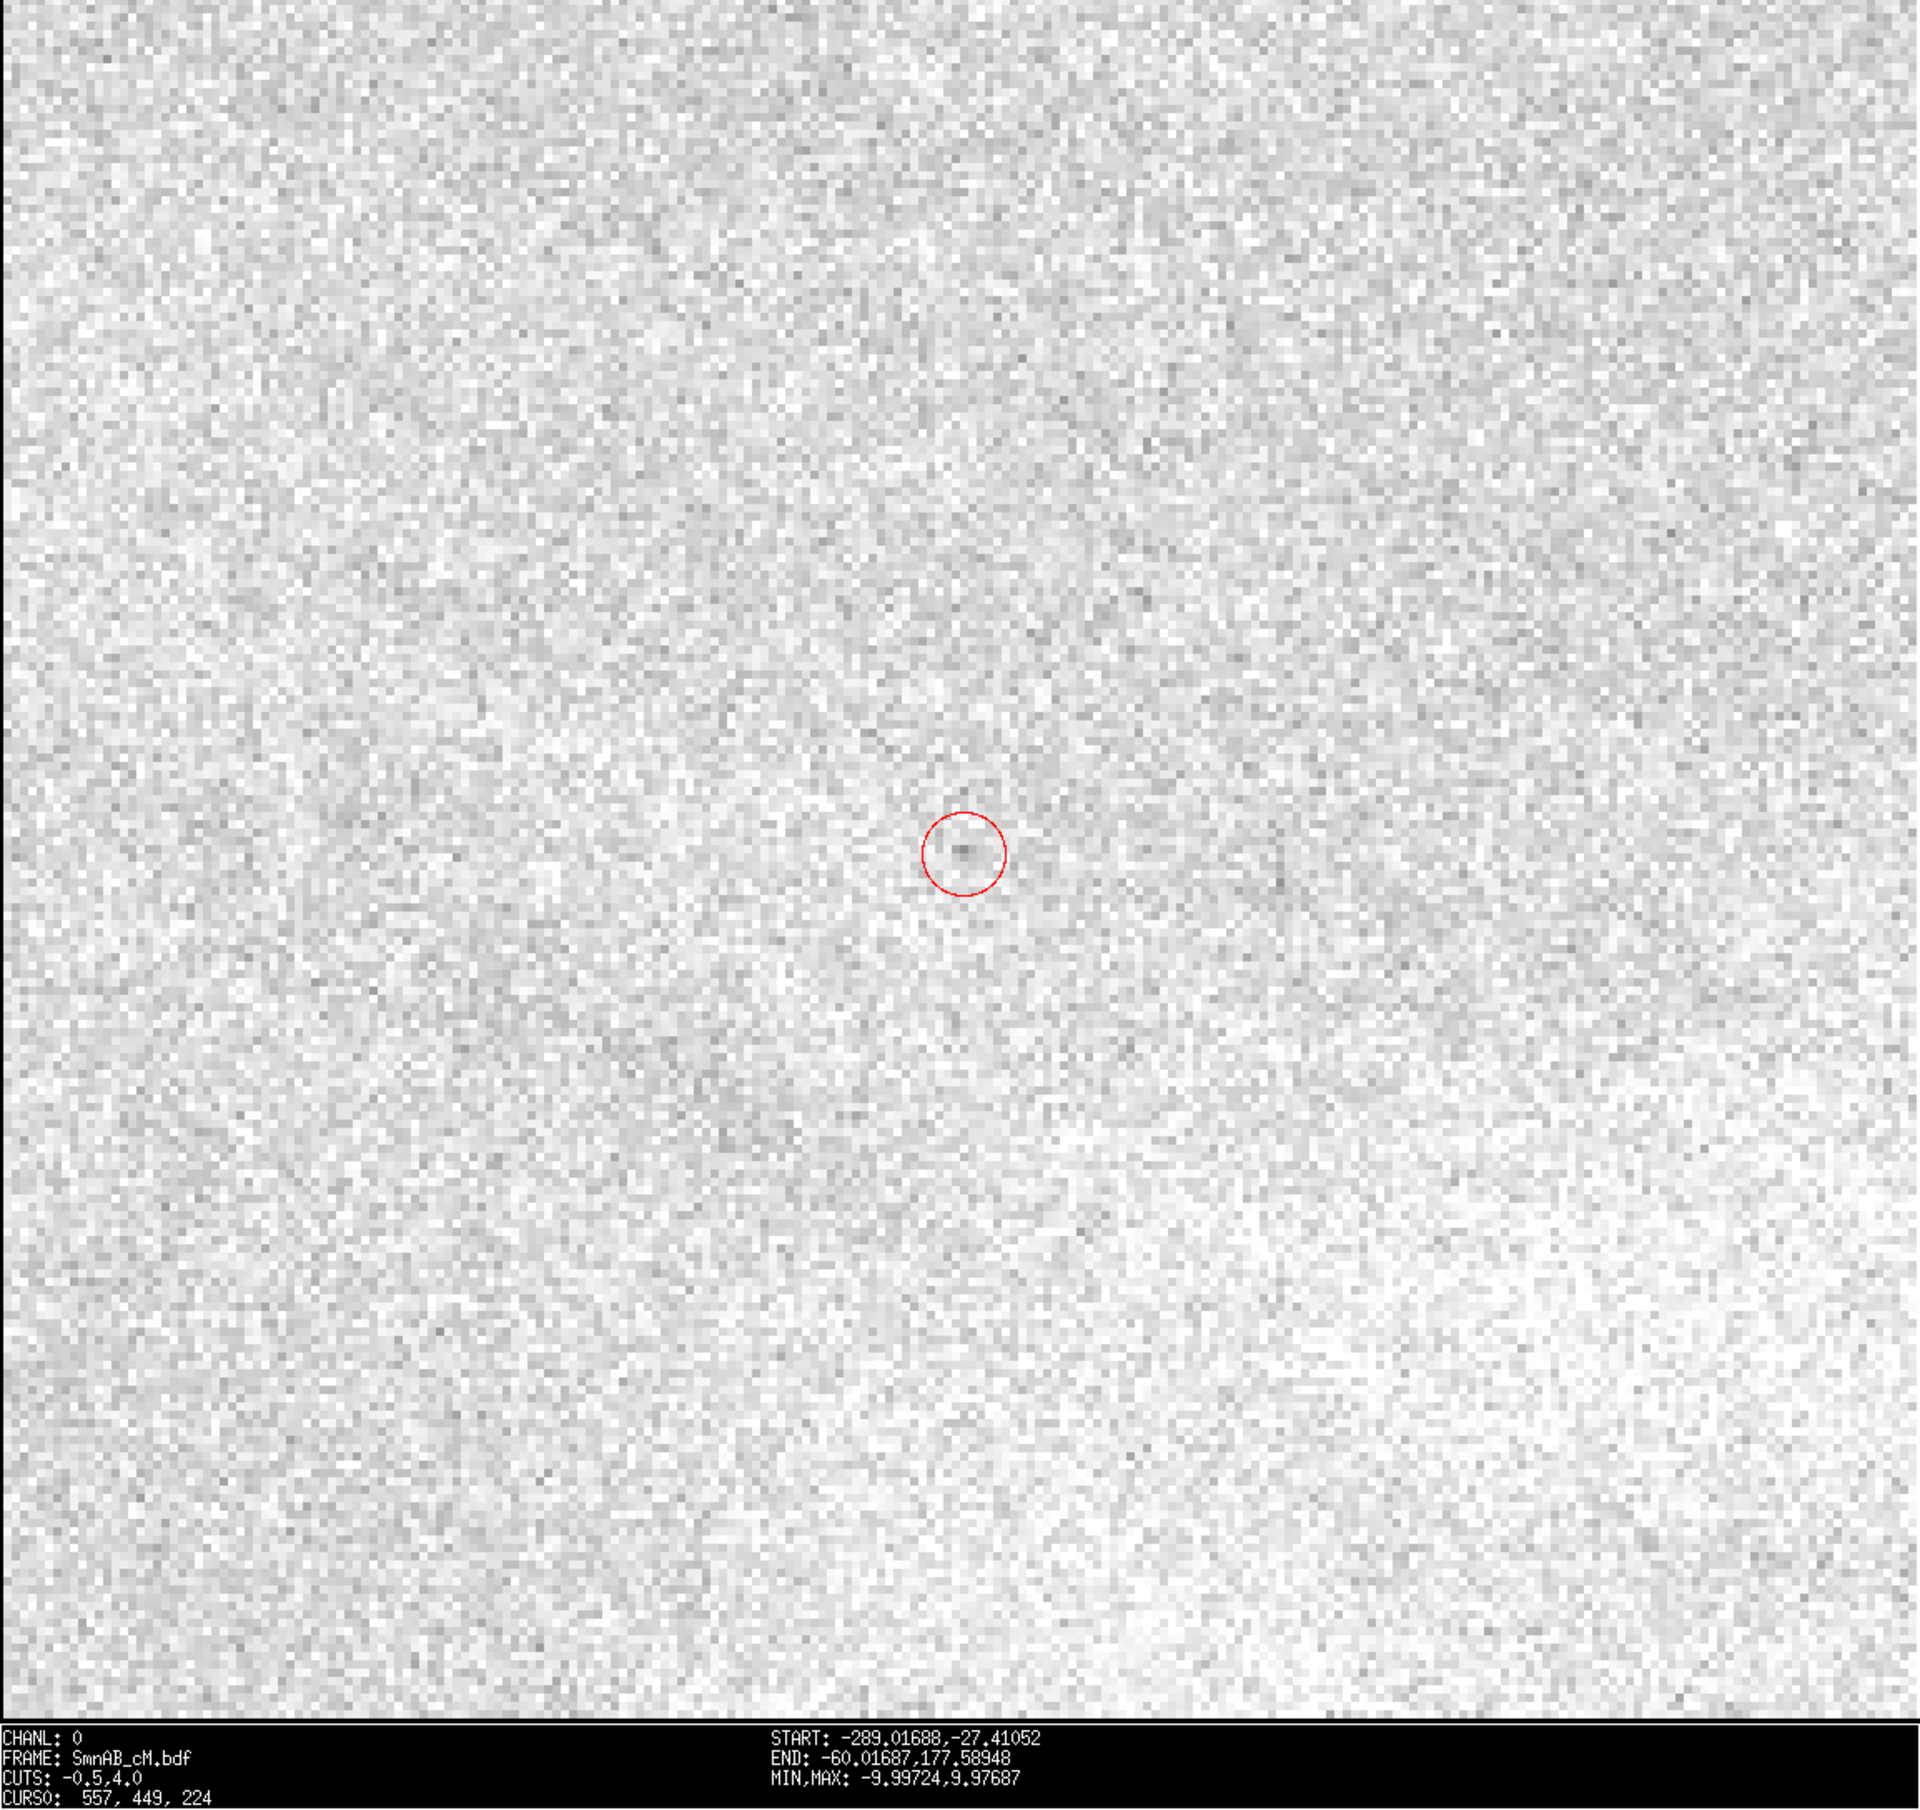 Faintest-ever asteroid observations reveals 2021 QM1 is safe